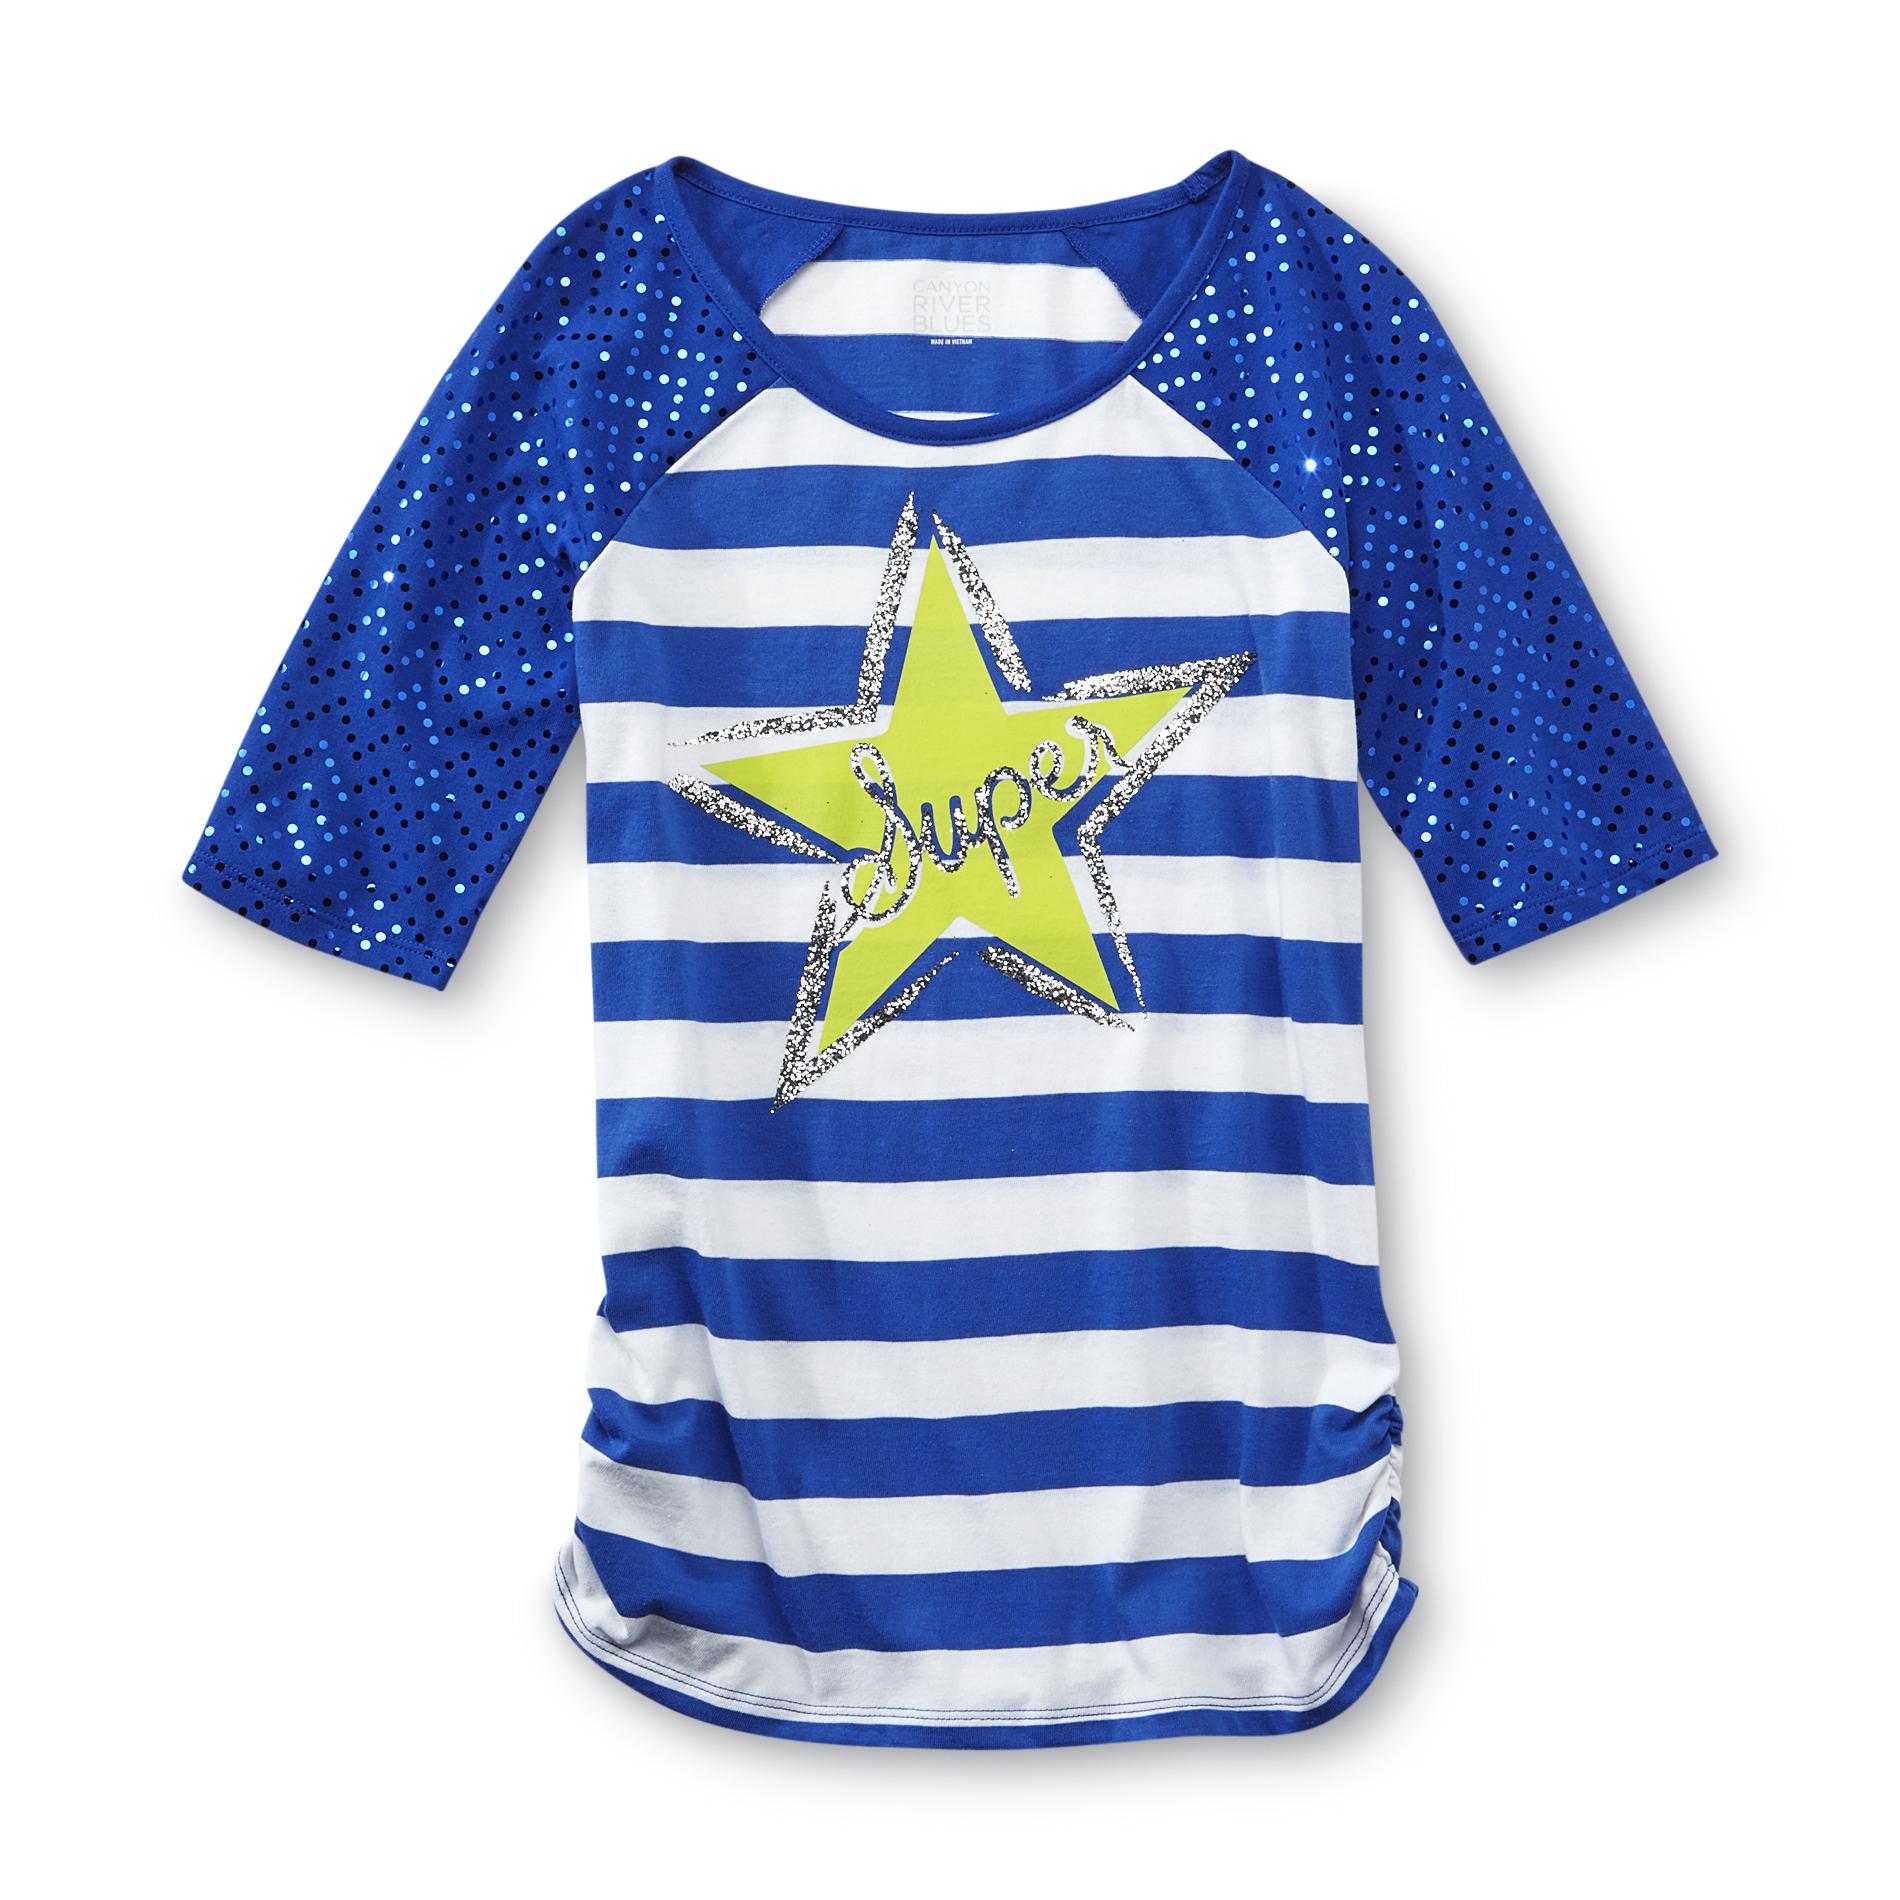 Canyon River Blues Girl's Raglan Sleeve Sequined Top - Super Star